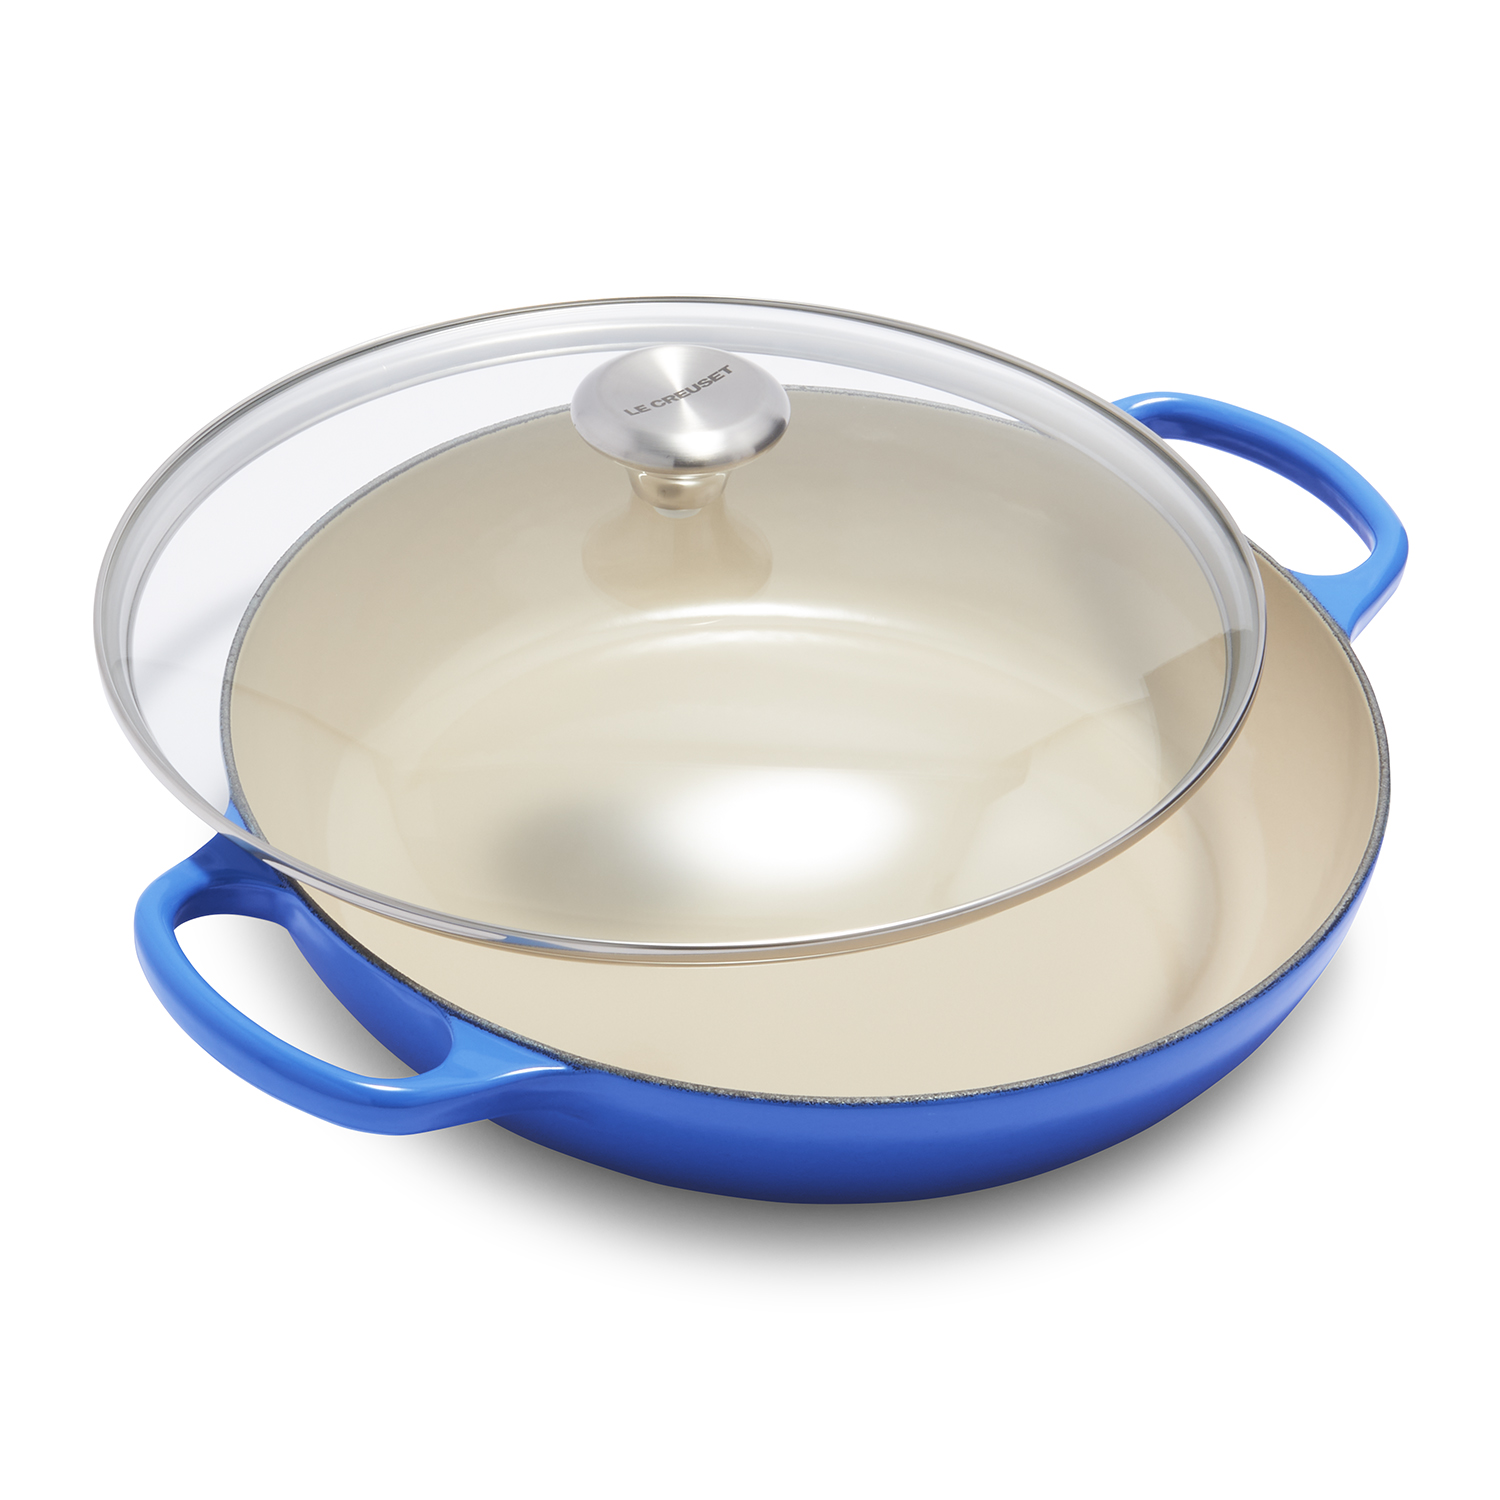 le creuset French oven with lid